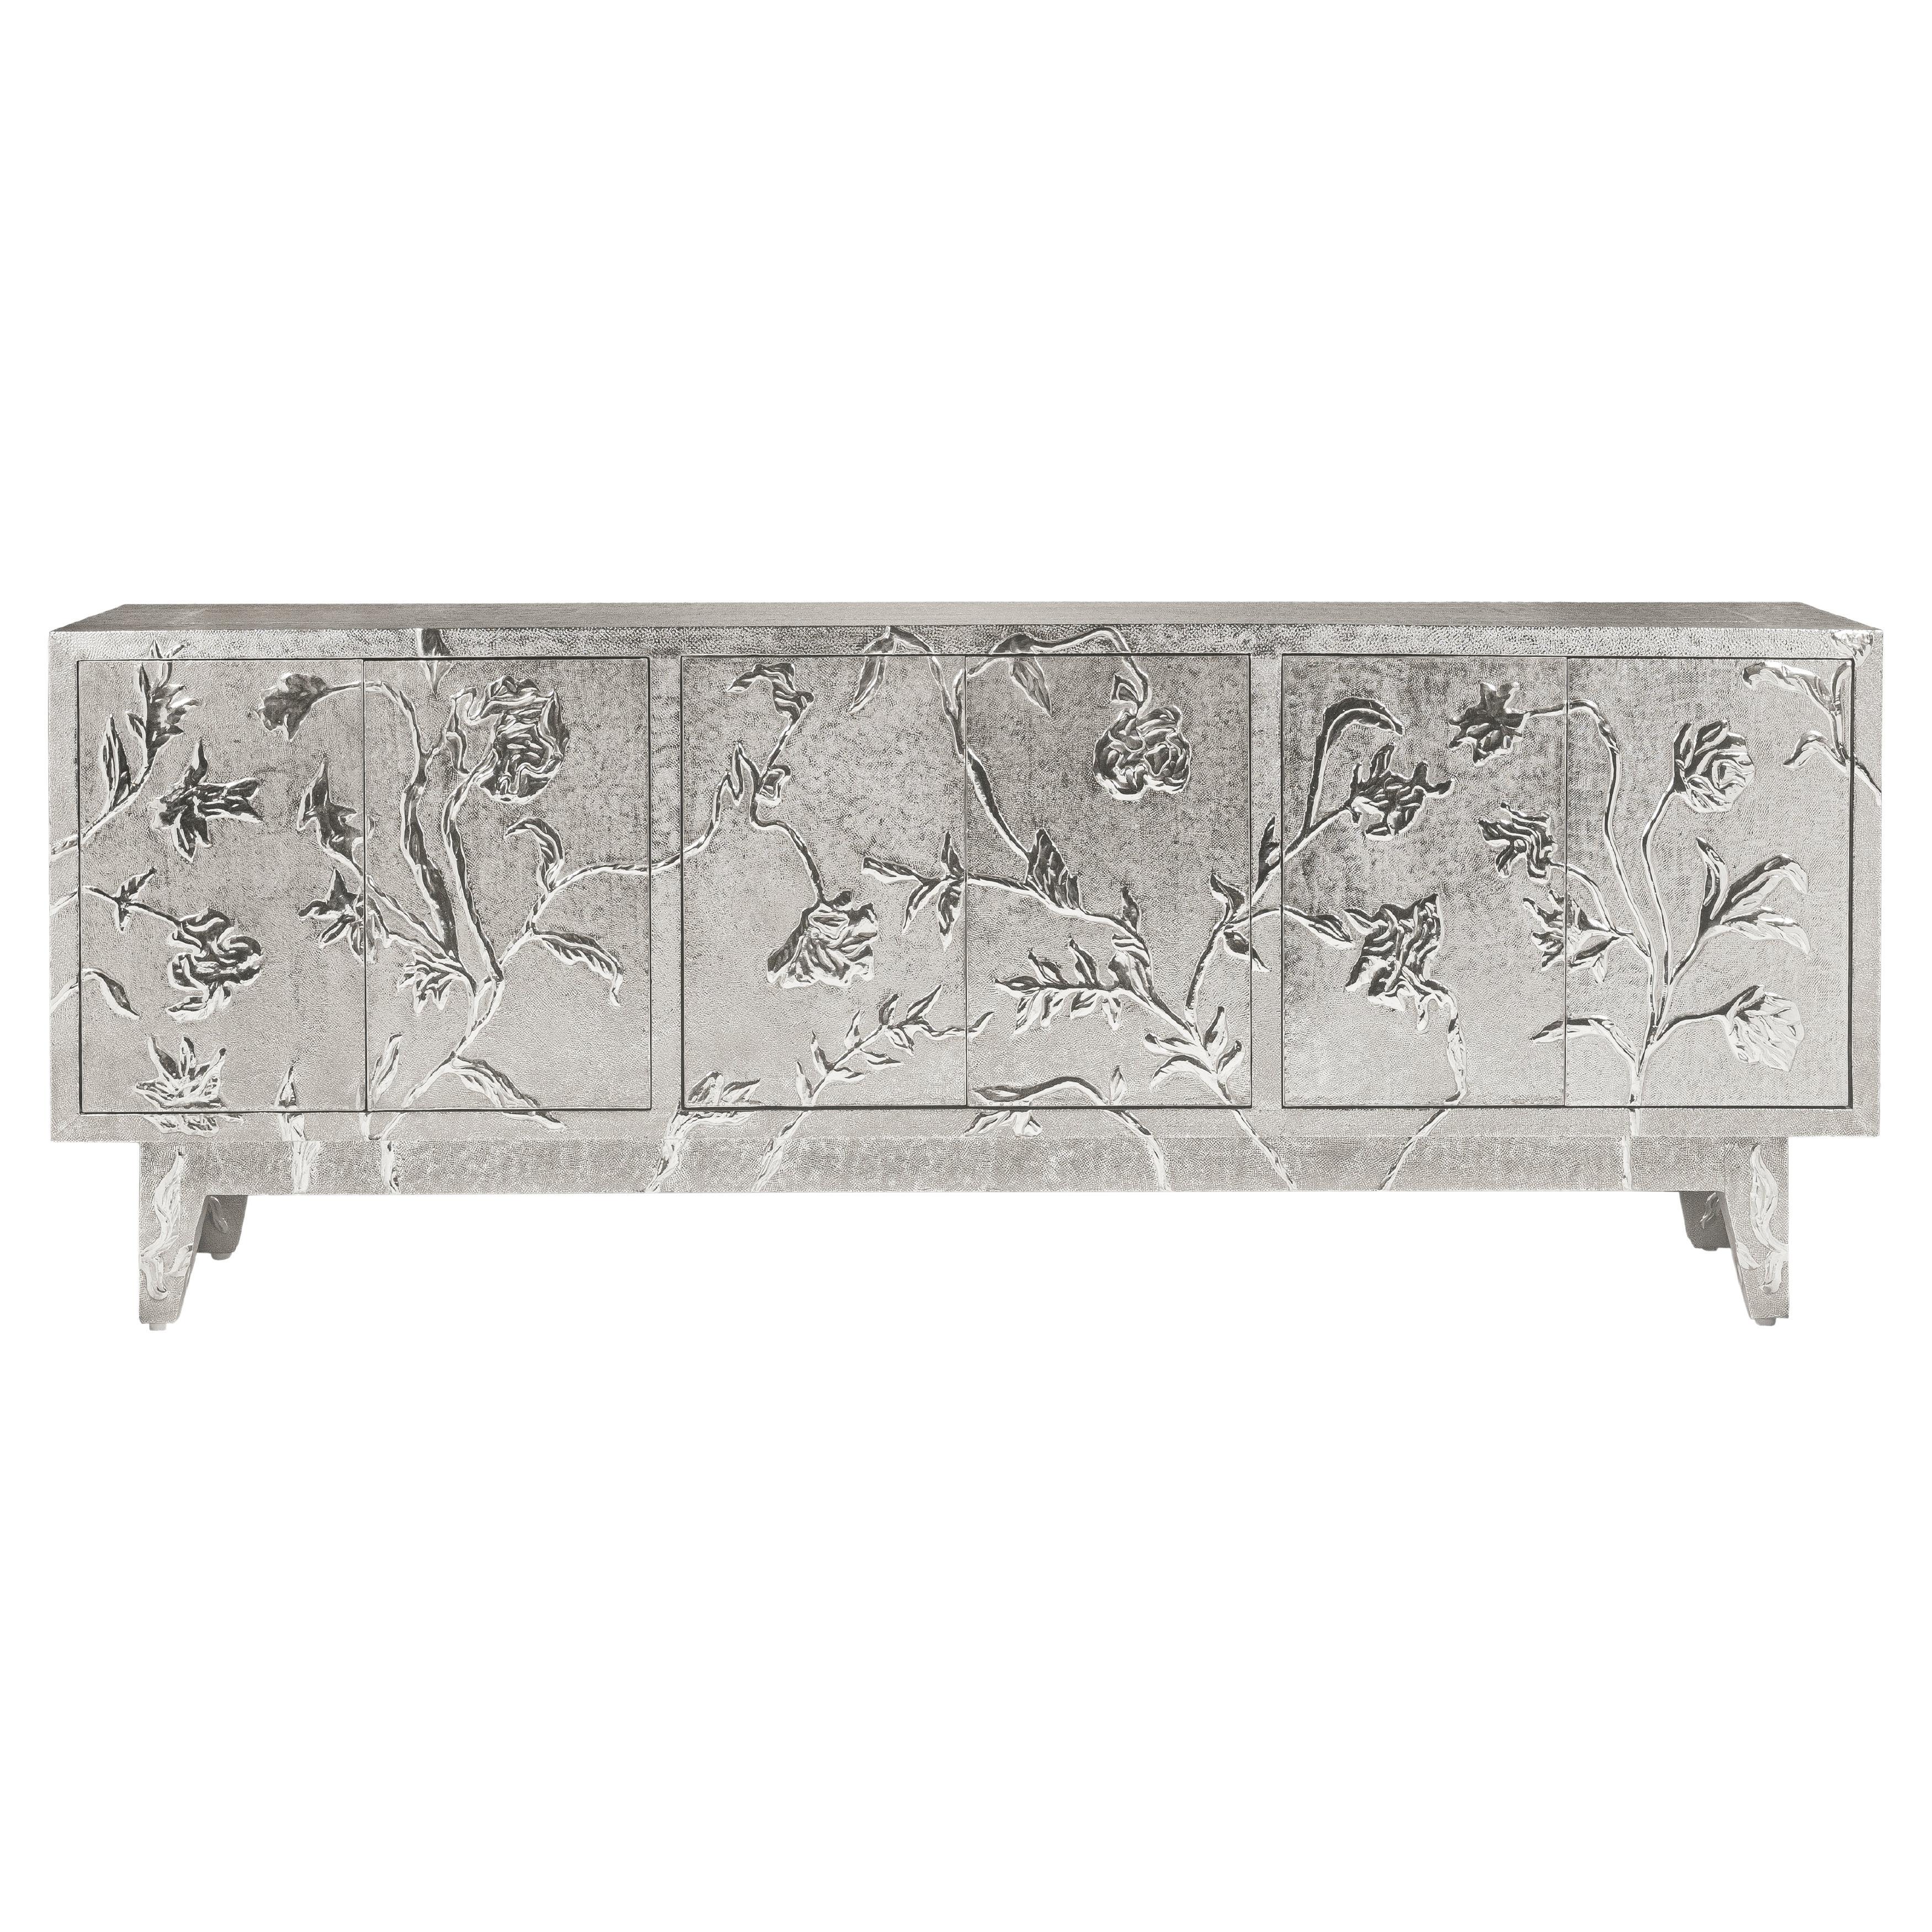 Art Deco Credenza in Floral Design by Stephanie Odegard For Sale